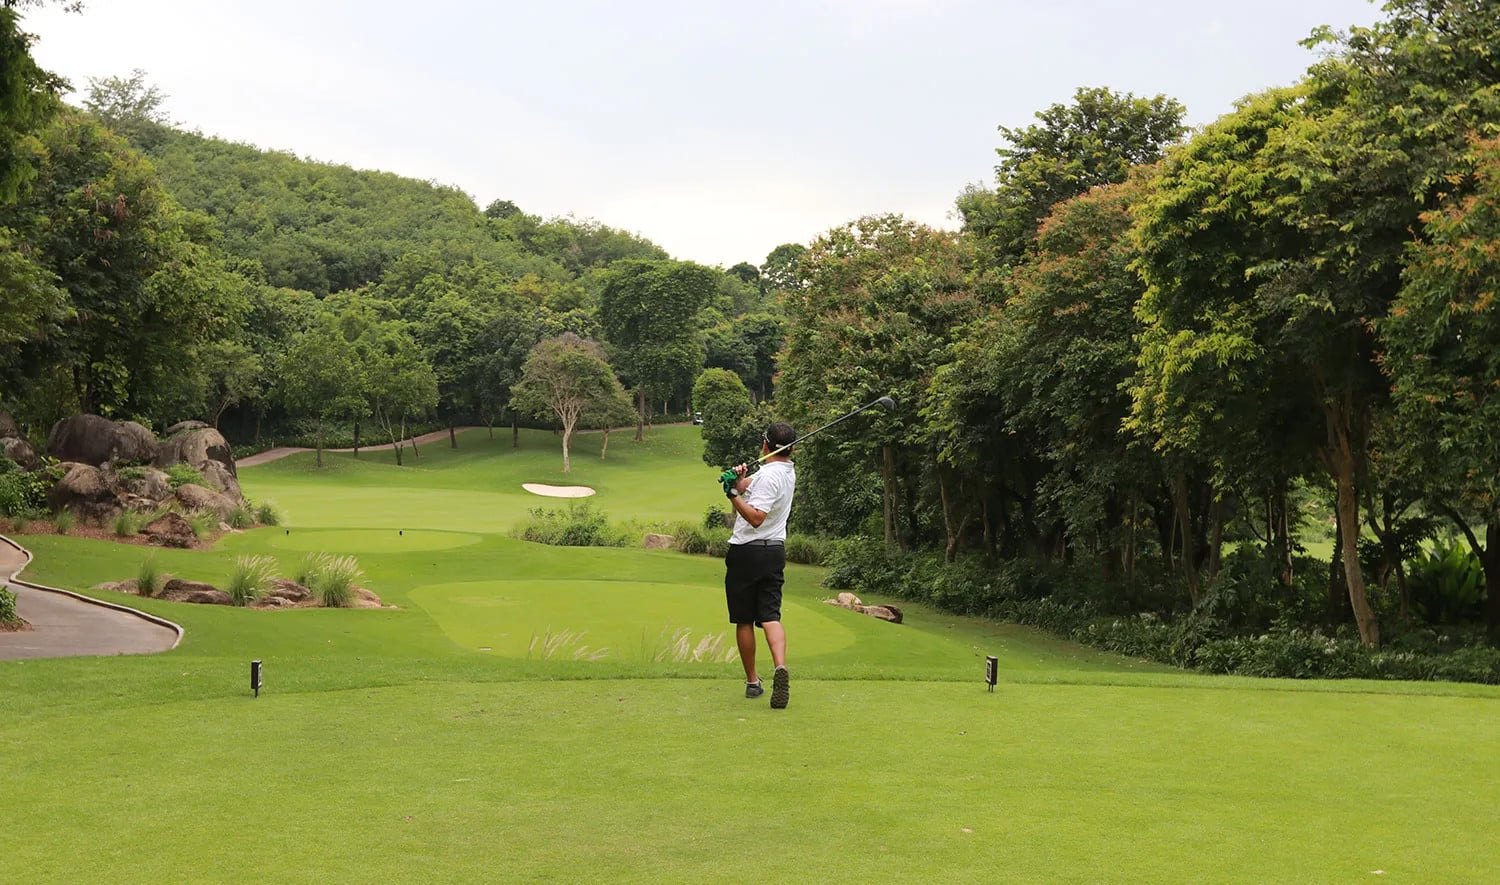 One of the best golf courses in Pattaya